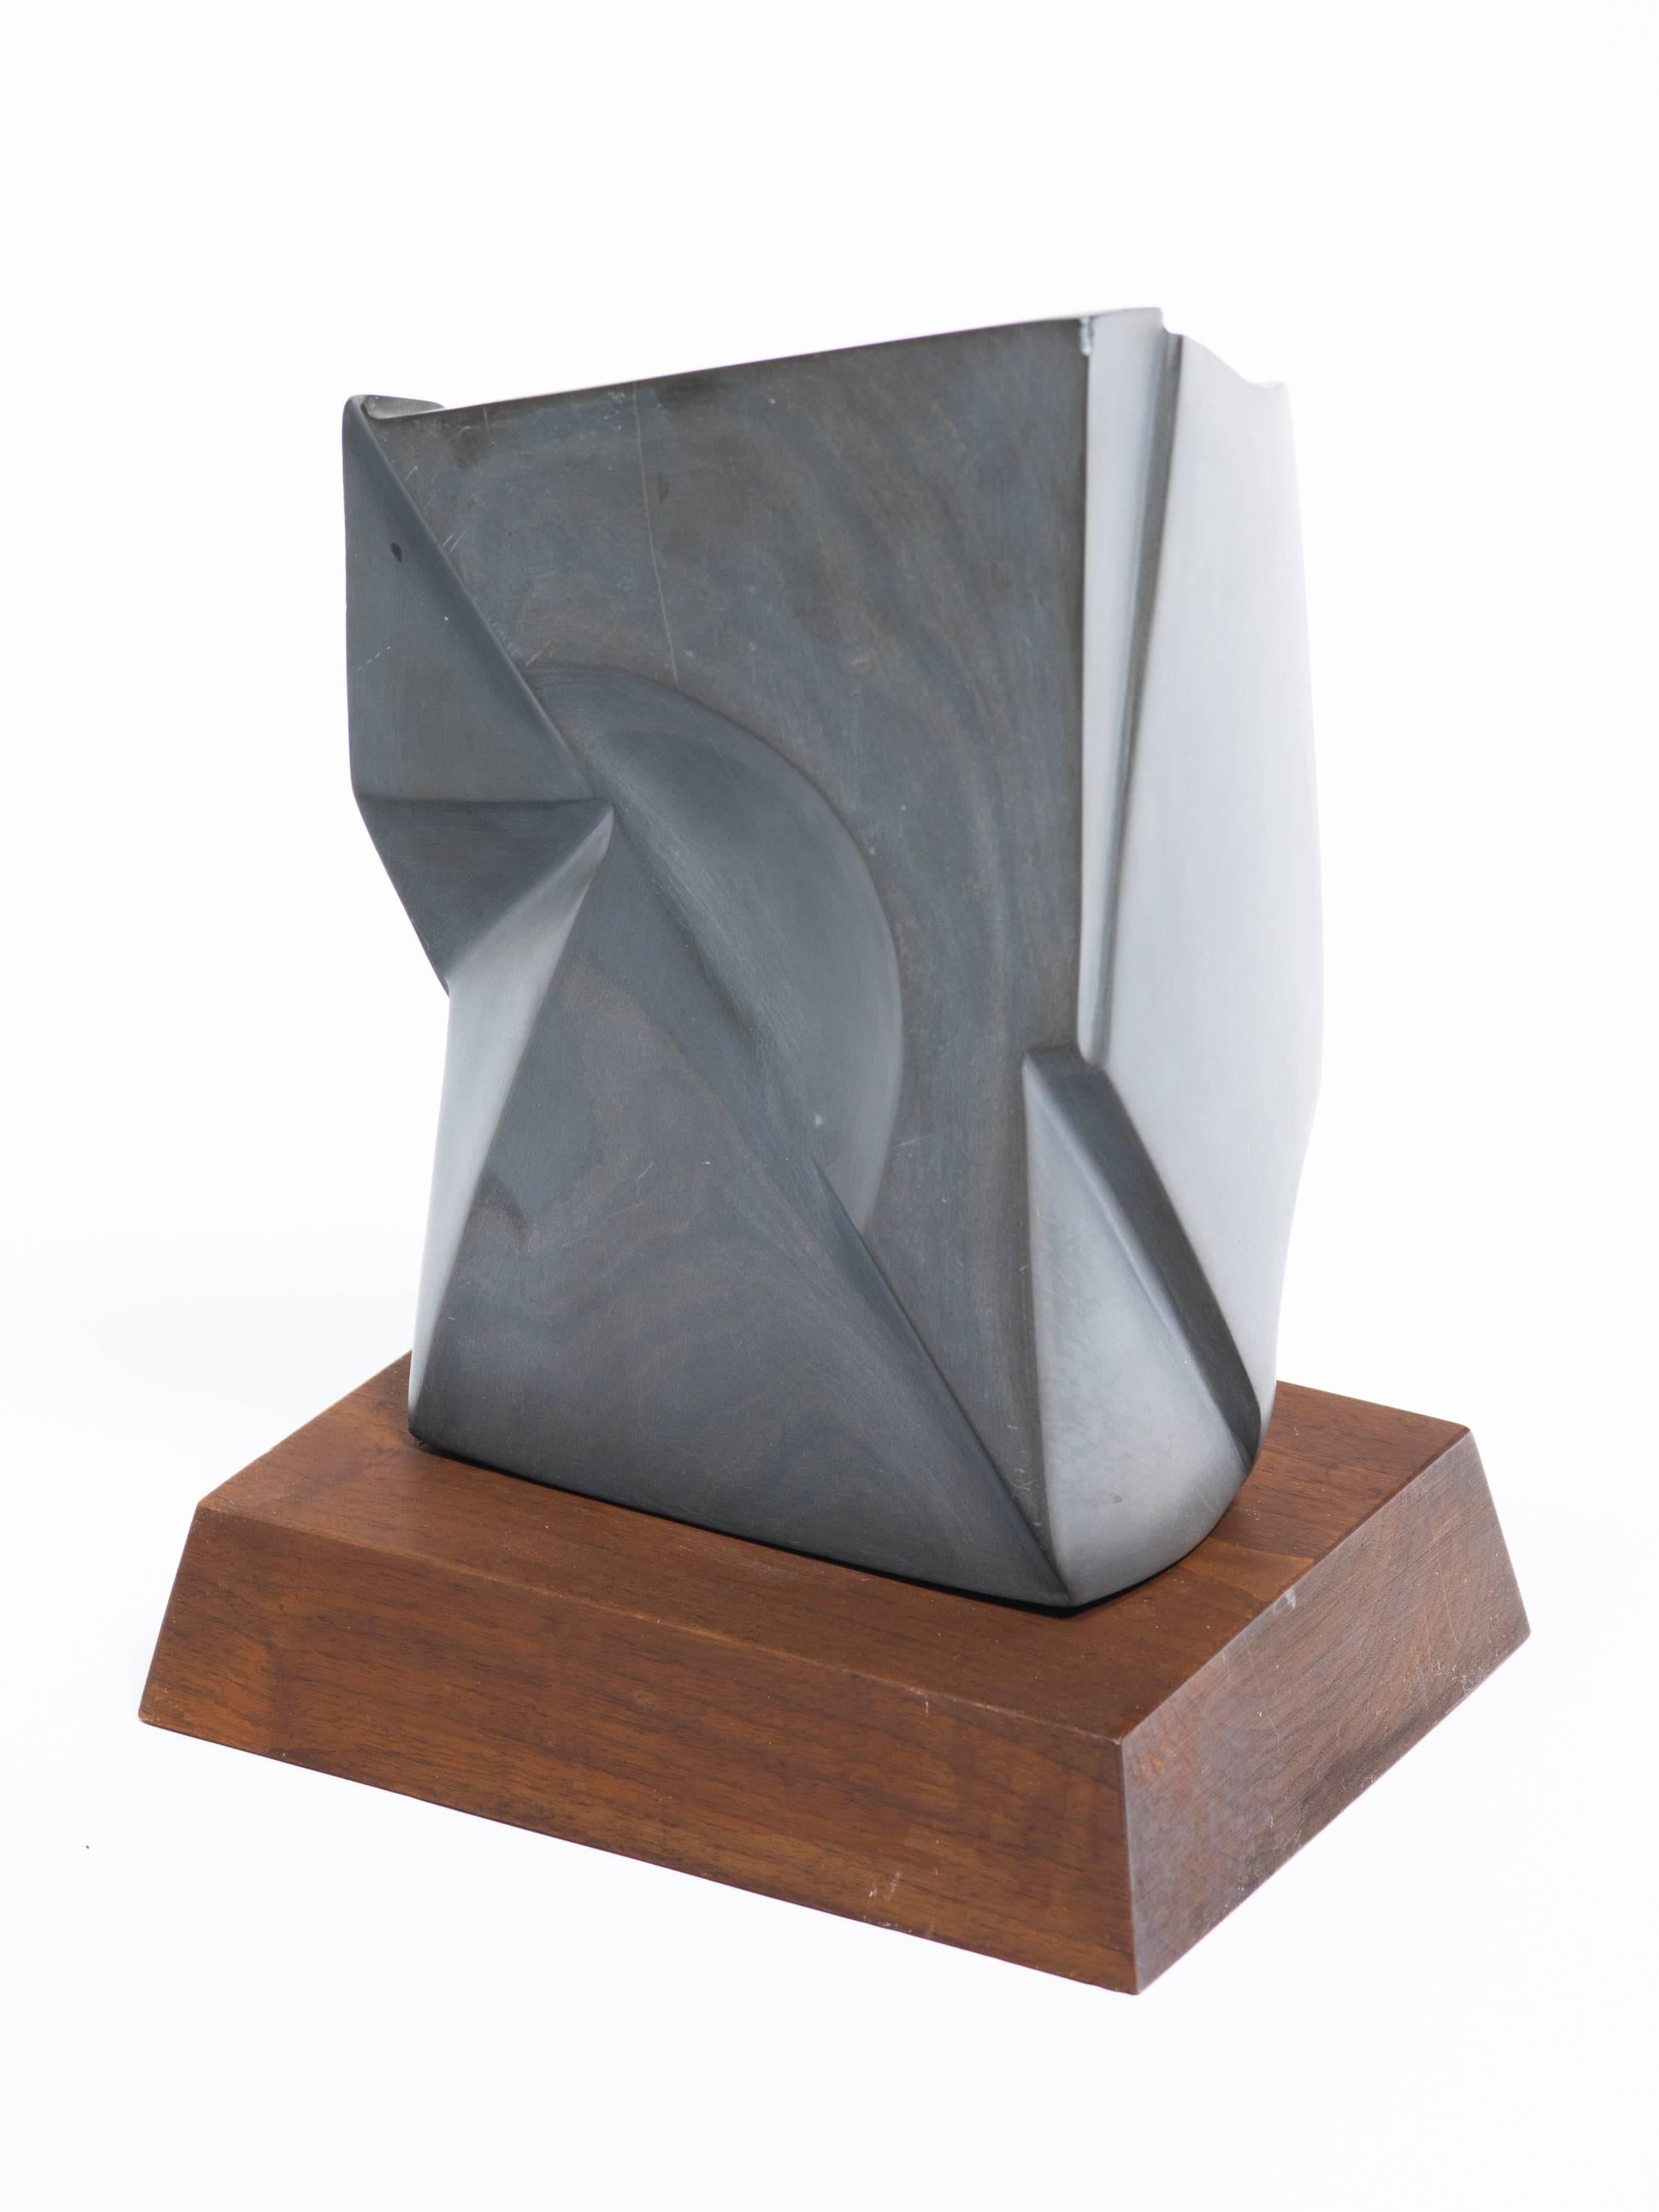 Late 20th Century Art Deco Style Marble Sculpture